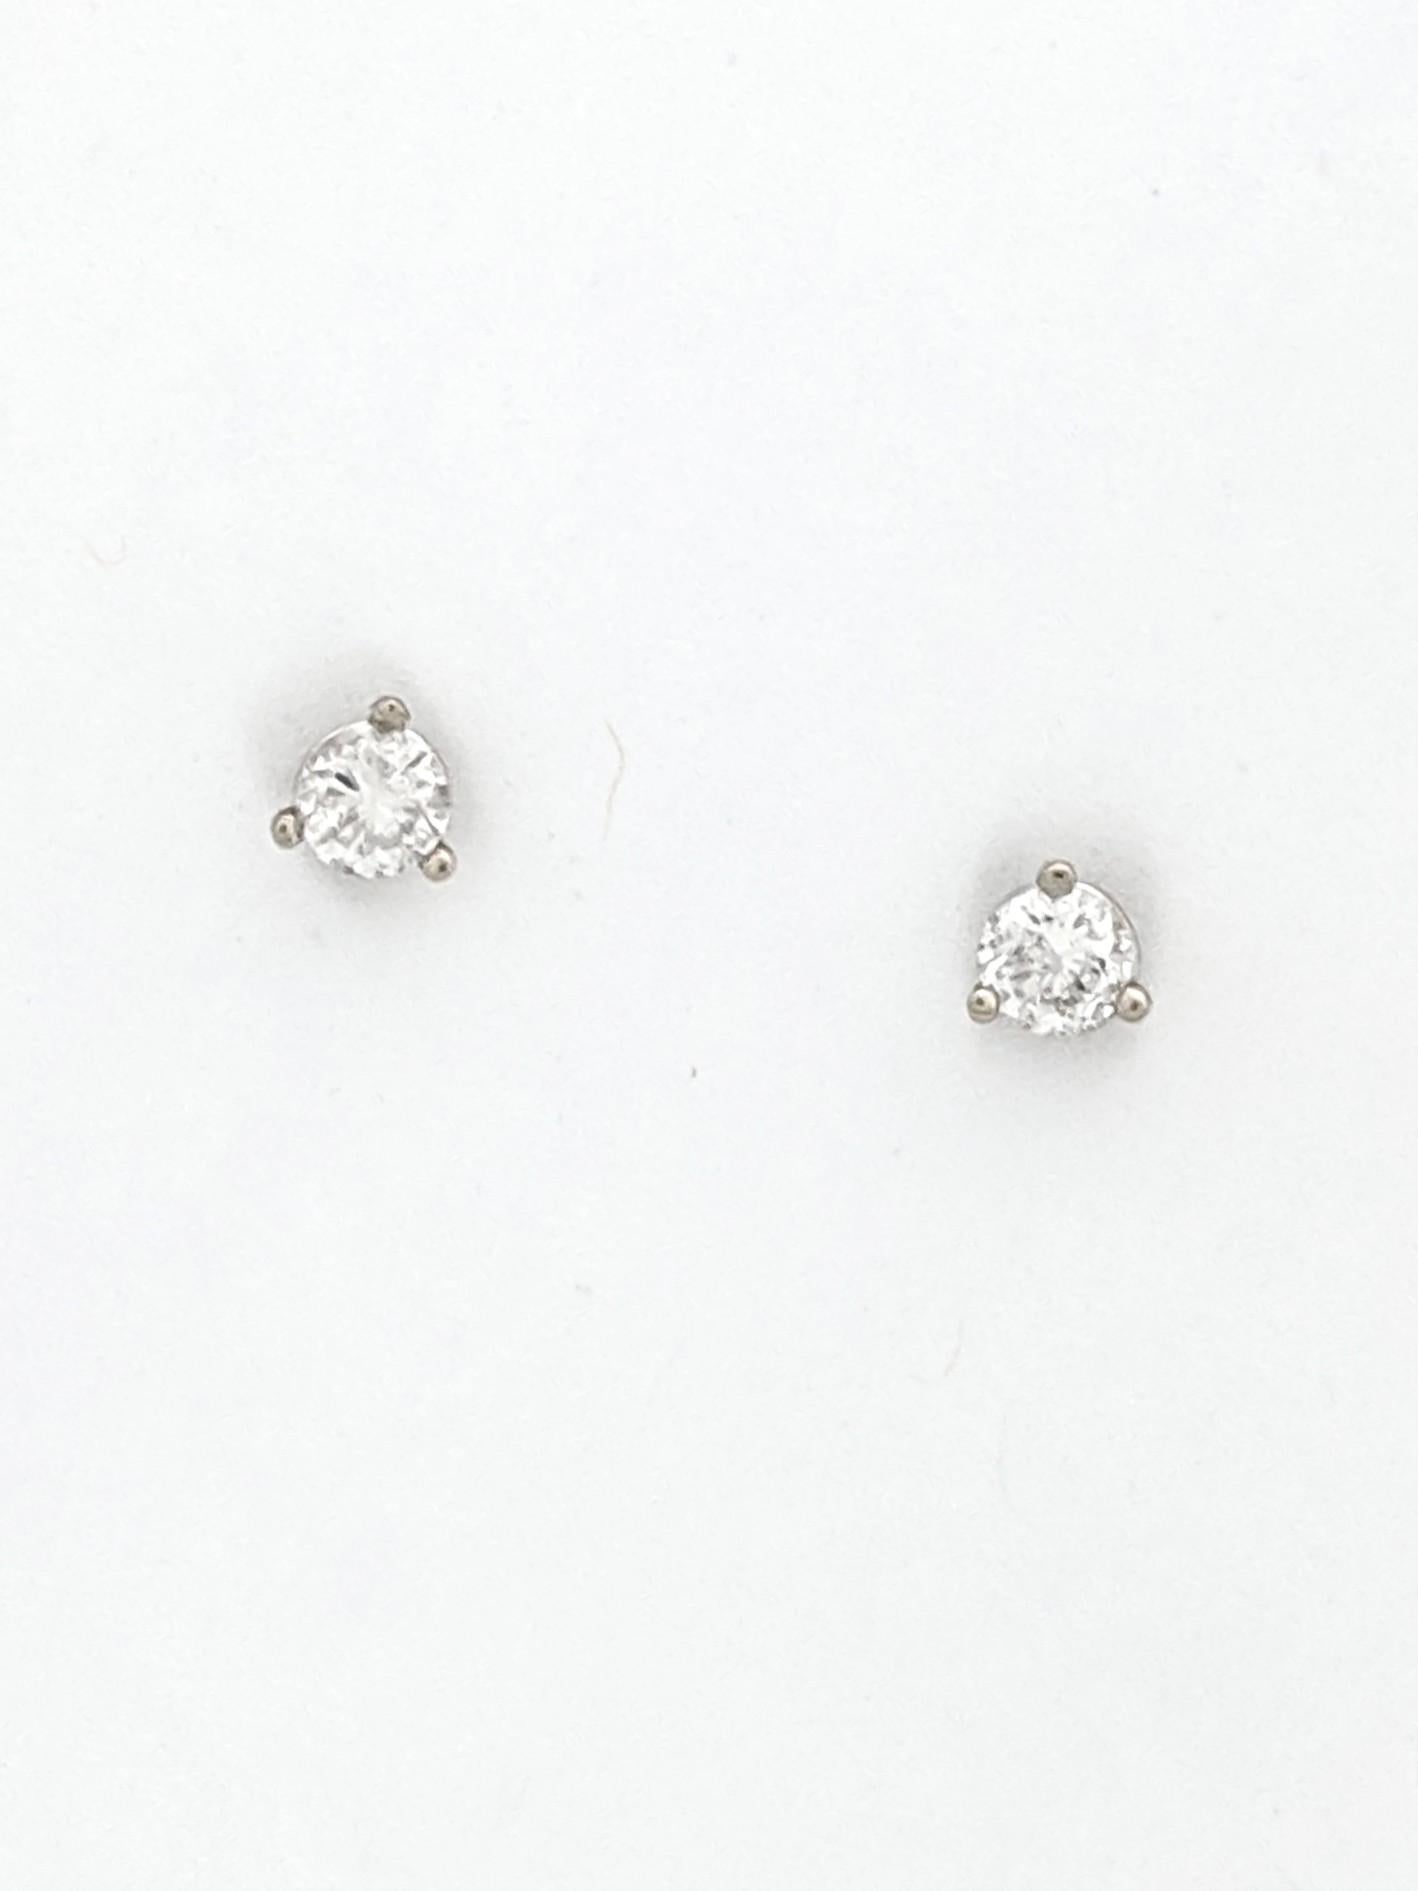  14k White Gold Round Brilliant Cut Diamond Stud Earrings .30tcw I1/H 

You are viewing a Beautiful Pair of Diamond Stud Earrings.

These earrings are crafted from 14k white gold and weighs 1.1 grams. Each earring features approximately (1) 0.15ct